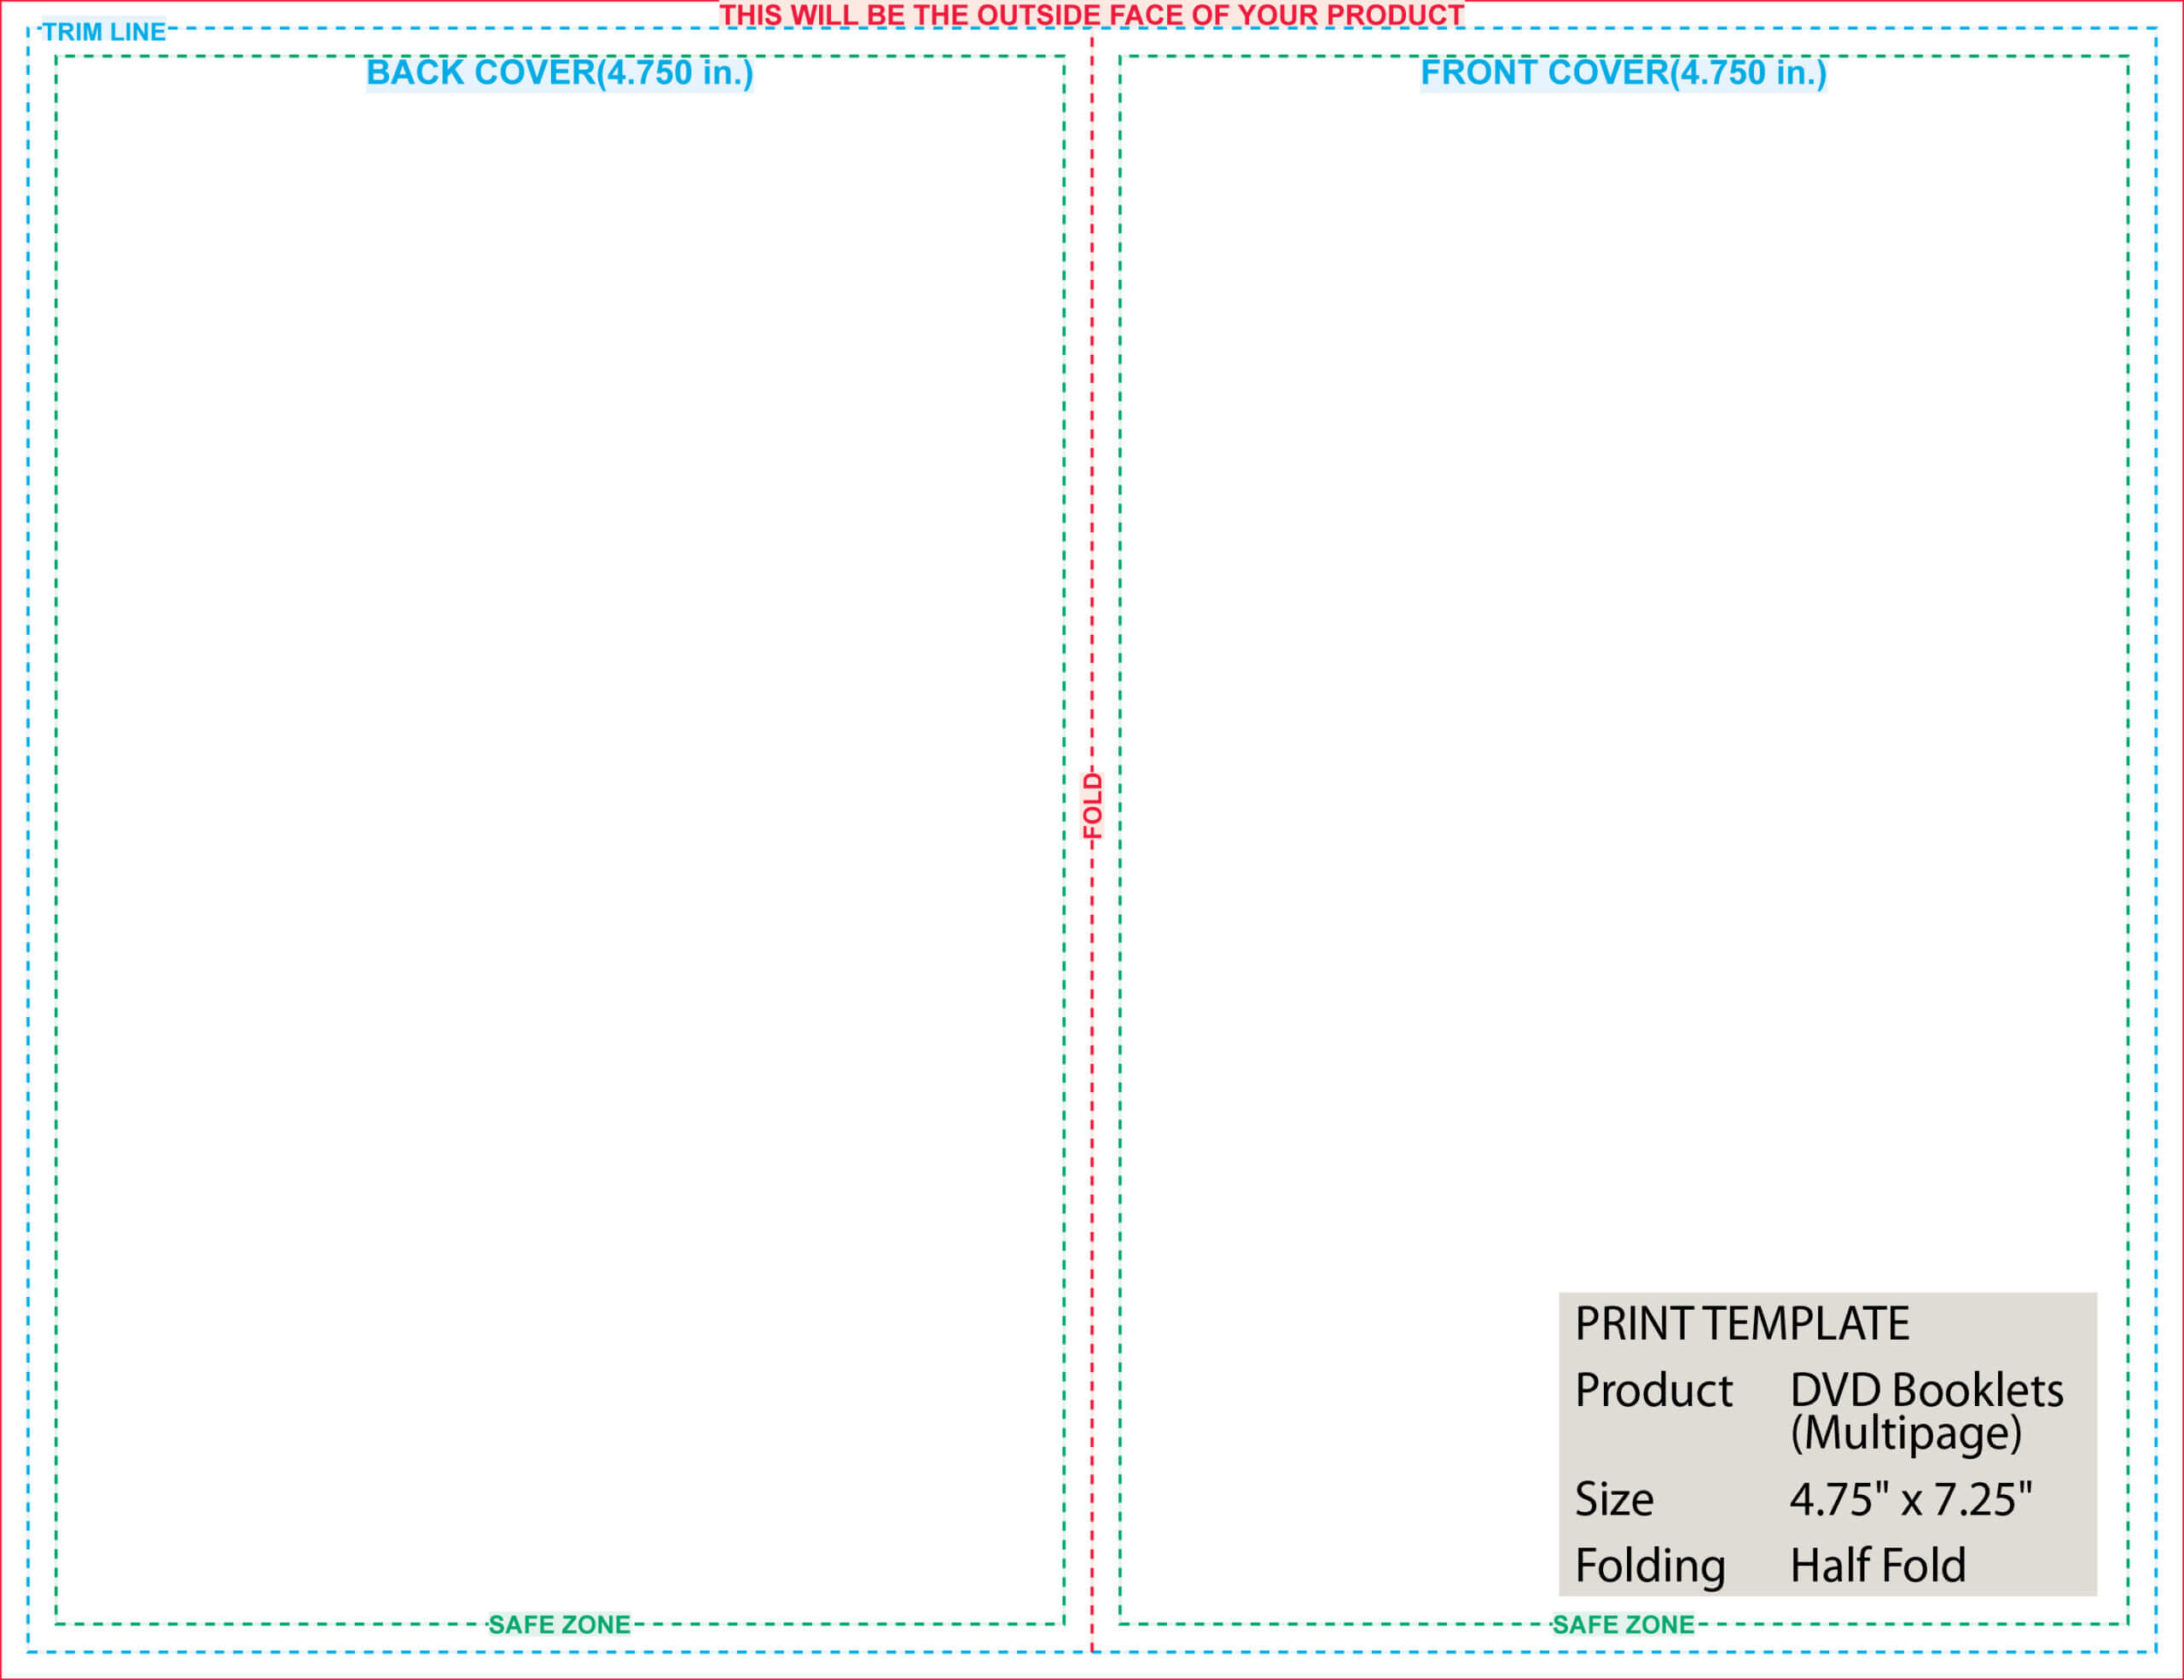 007 Template Ideas 75X7 25 Multipage Dvd Booklets Quarter Intended For Half Fold Card Template